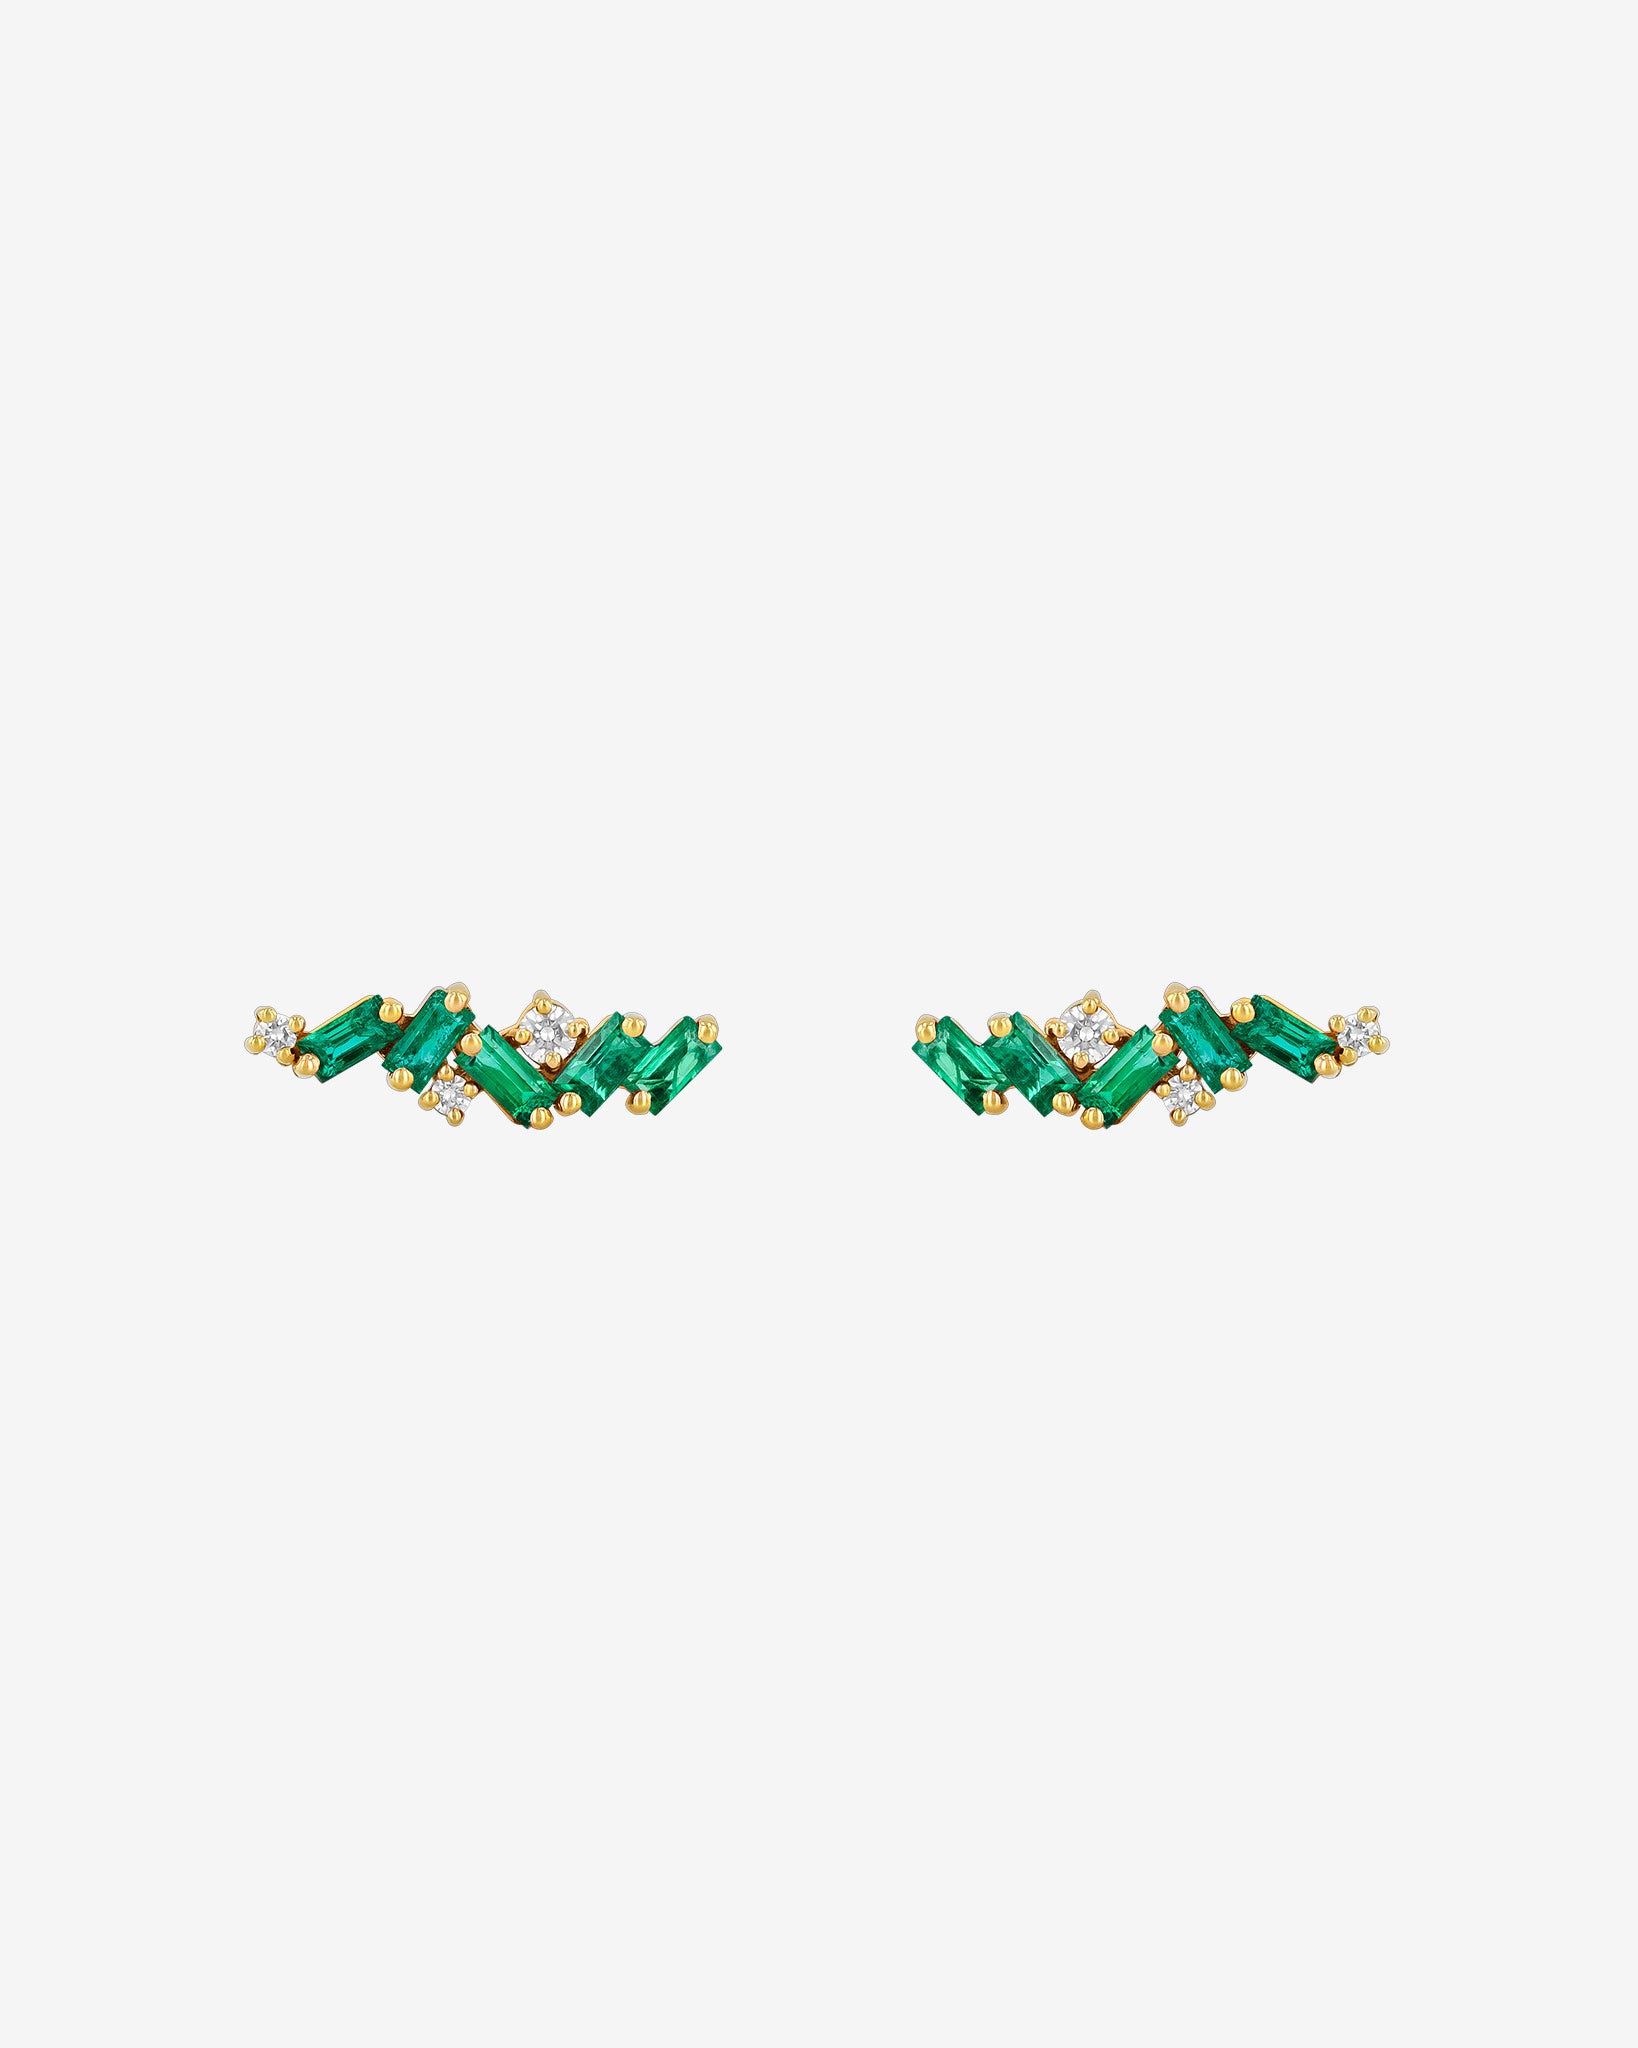 Suzanne Kalan Frenzy Emerald Studs in 18k yellow gold